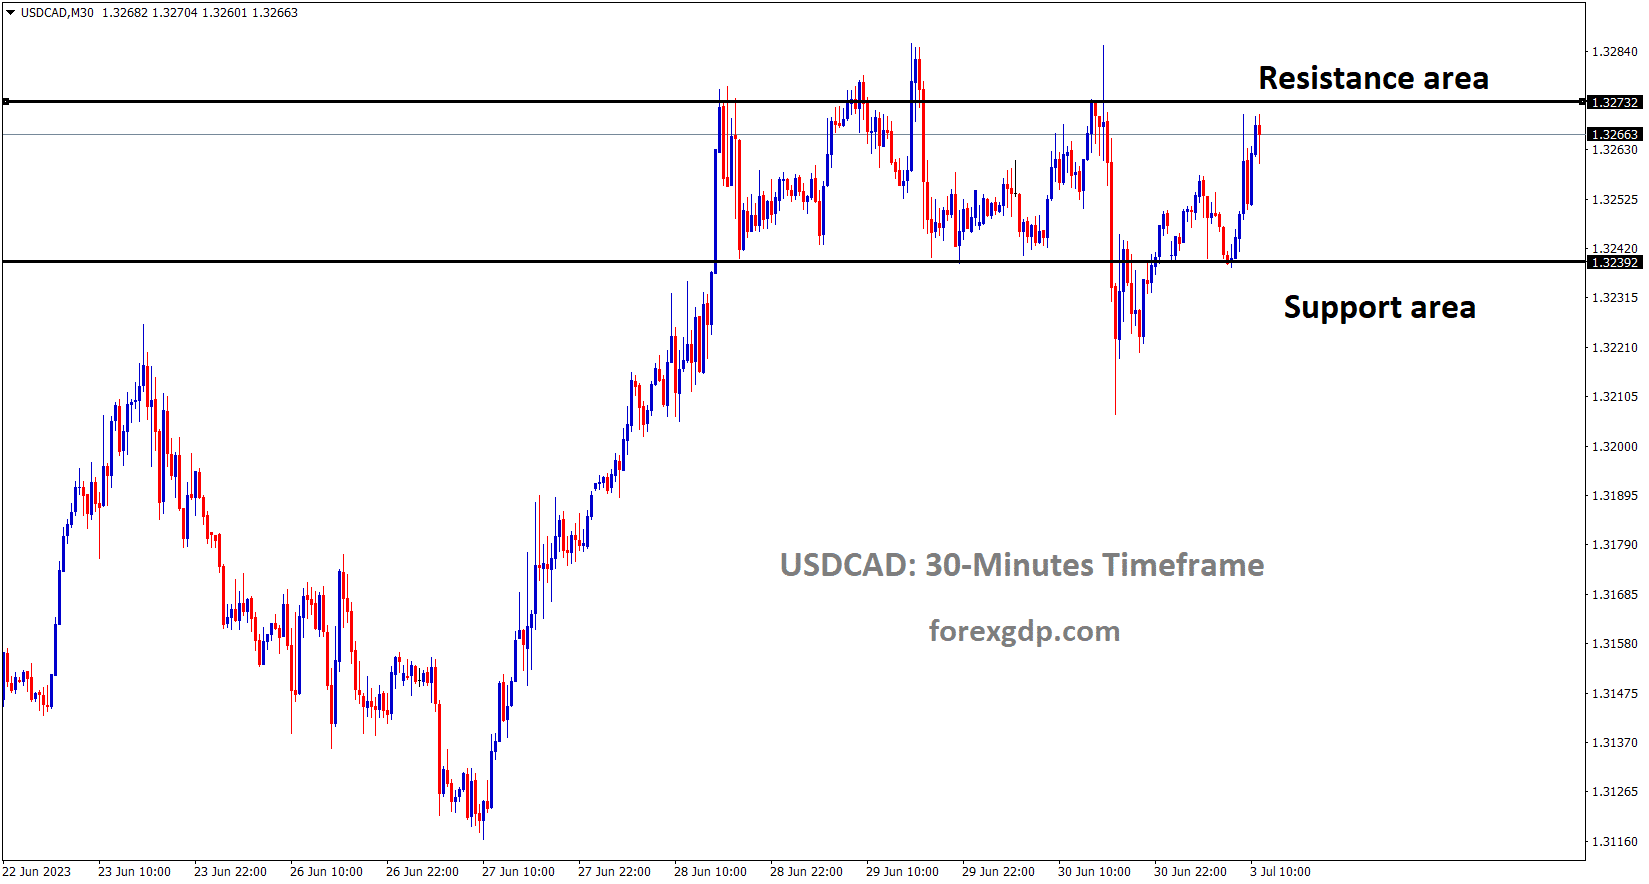 USDCAD is moving in the Box pattern and the market has reached the resistance area of the pattern